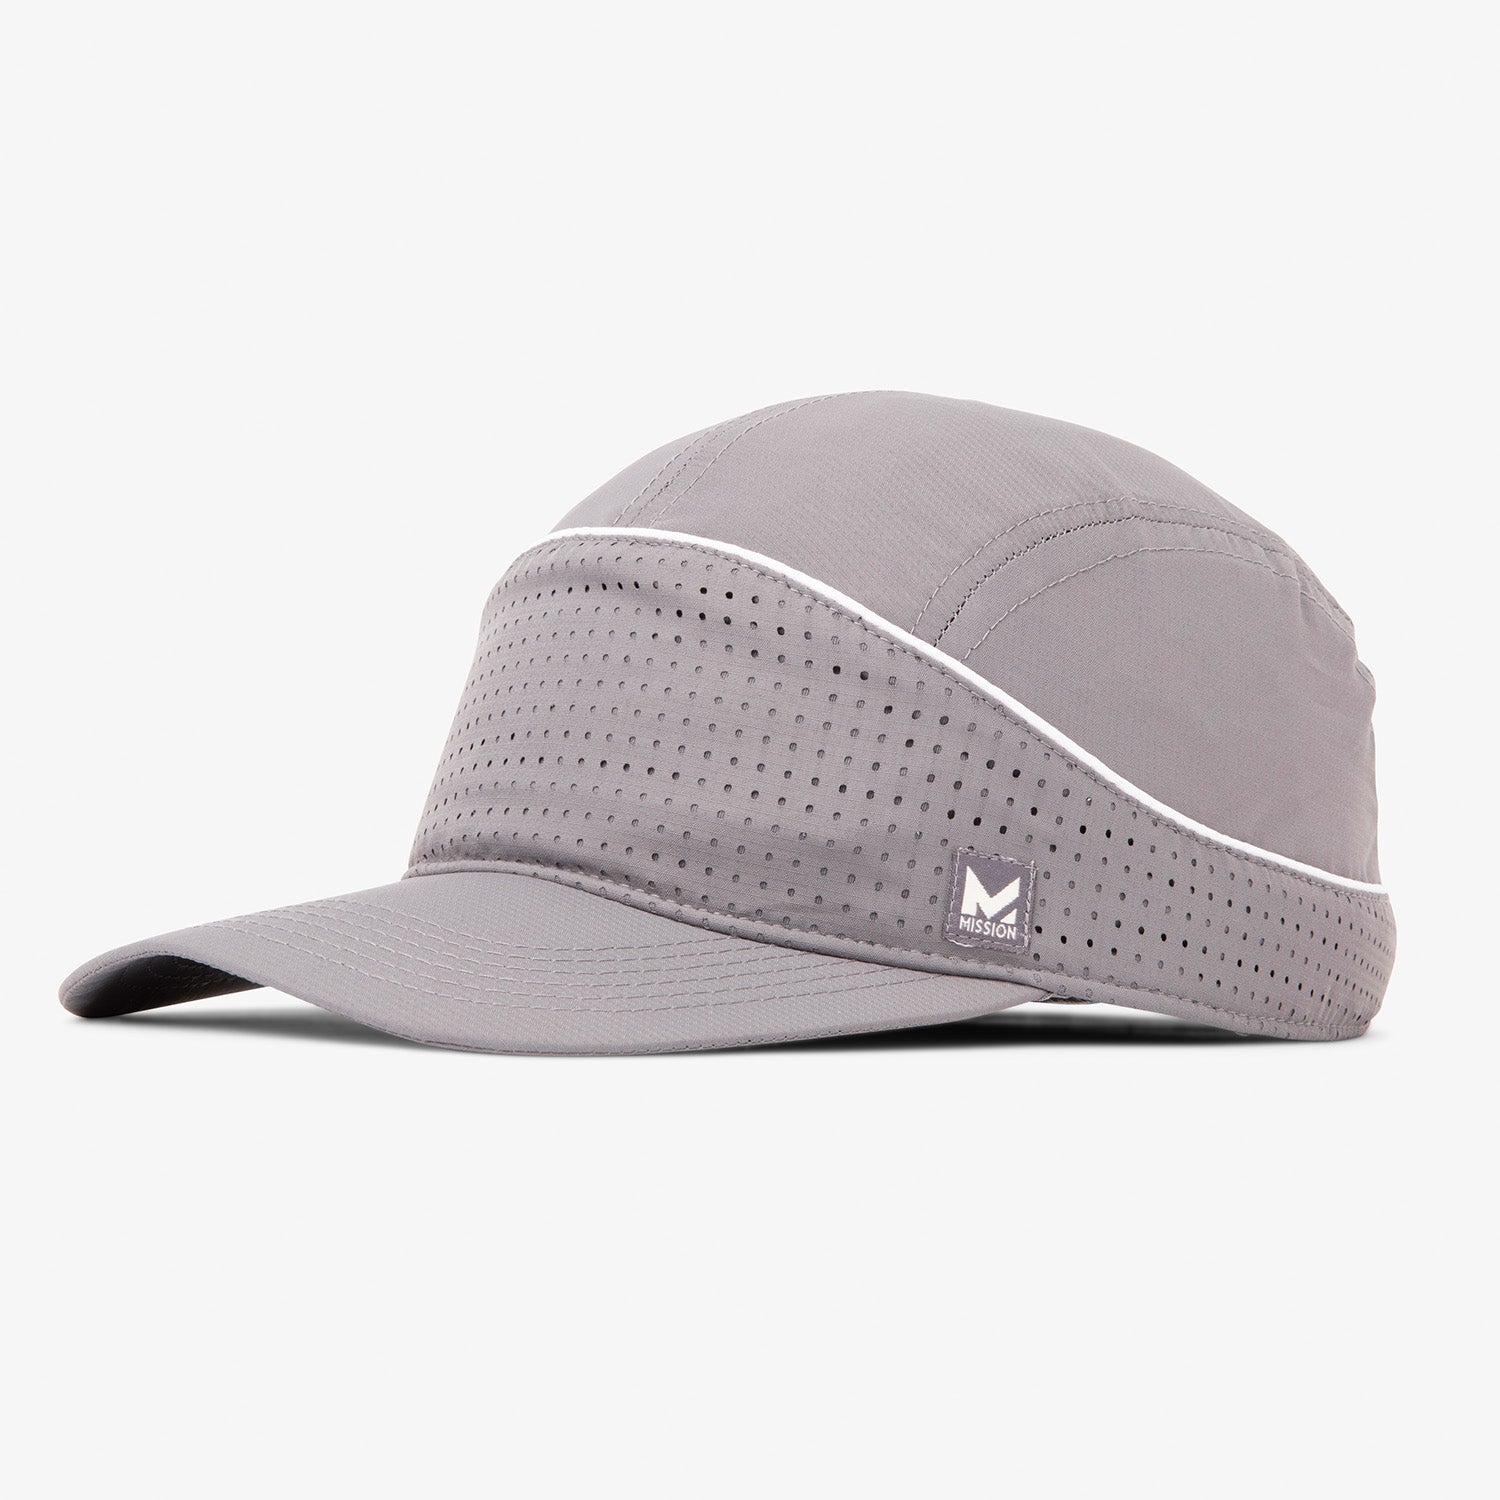 Cooling Racer Hat Caps MISSION One Size Charcoal/White 